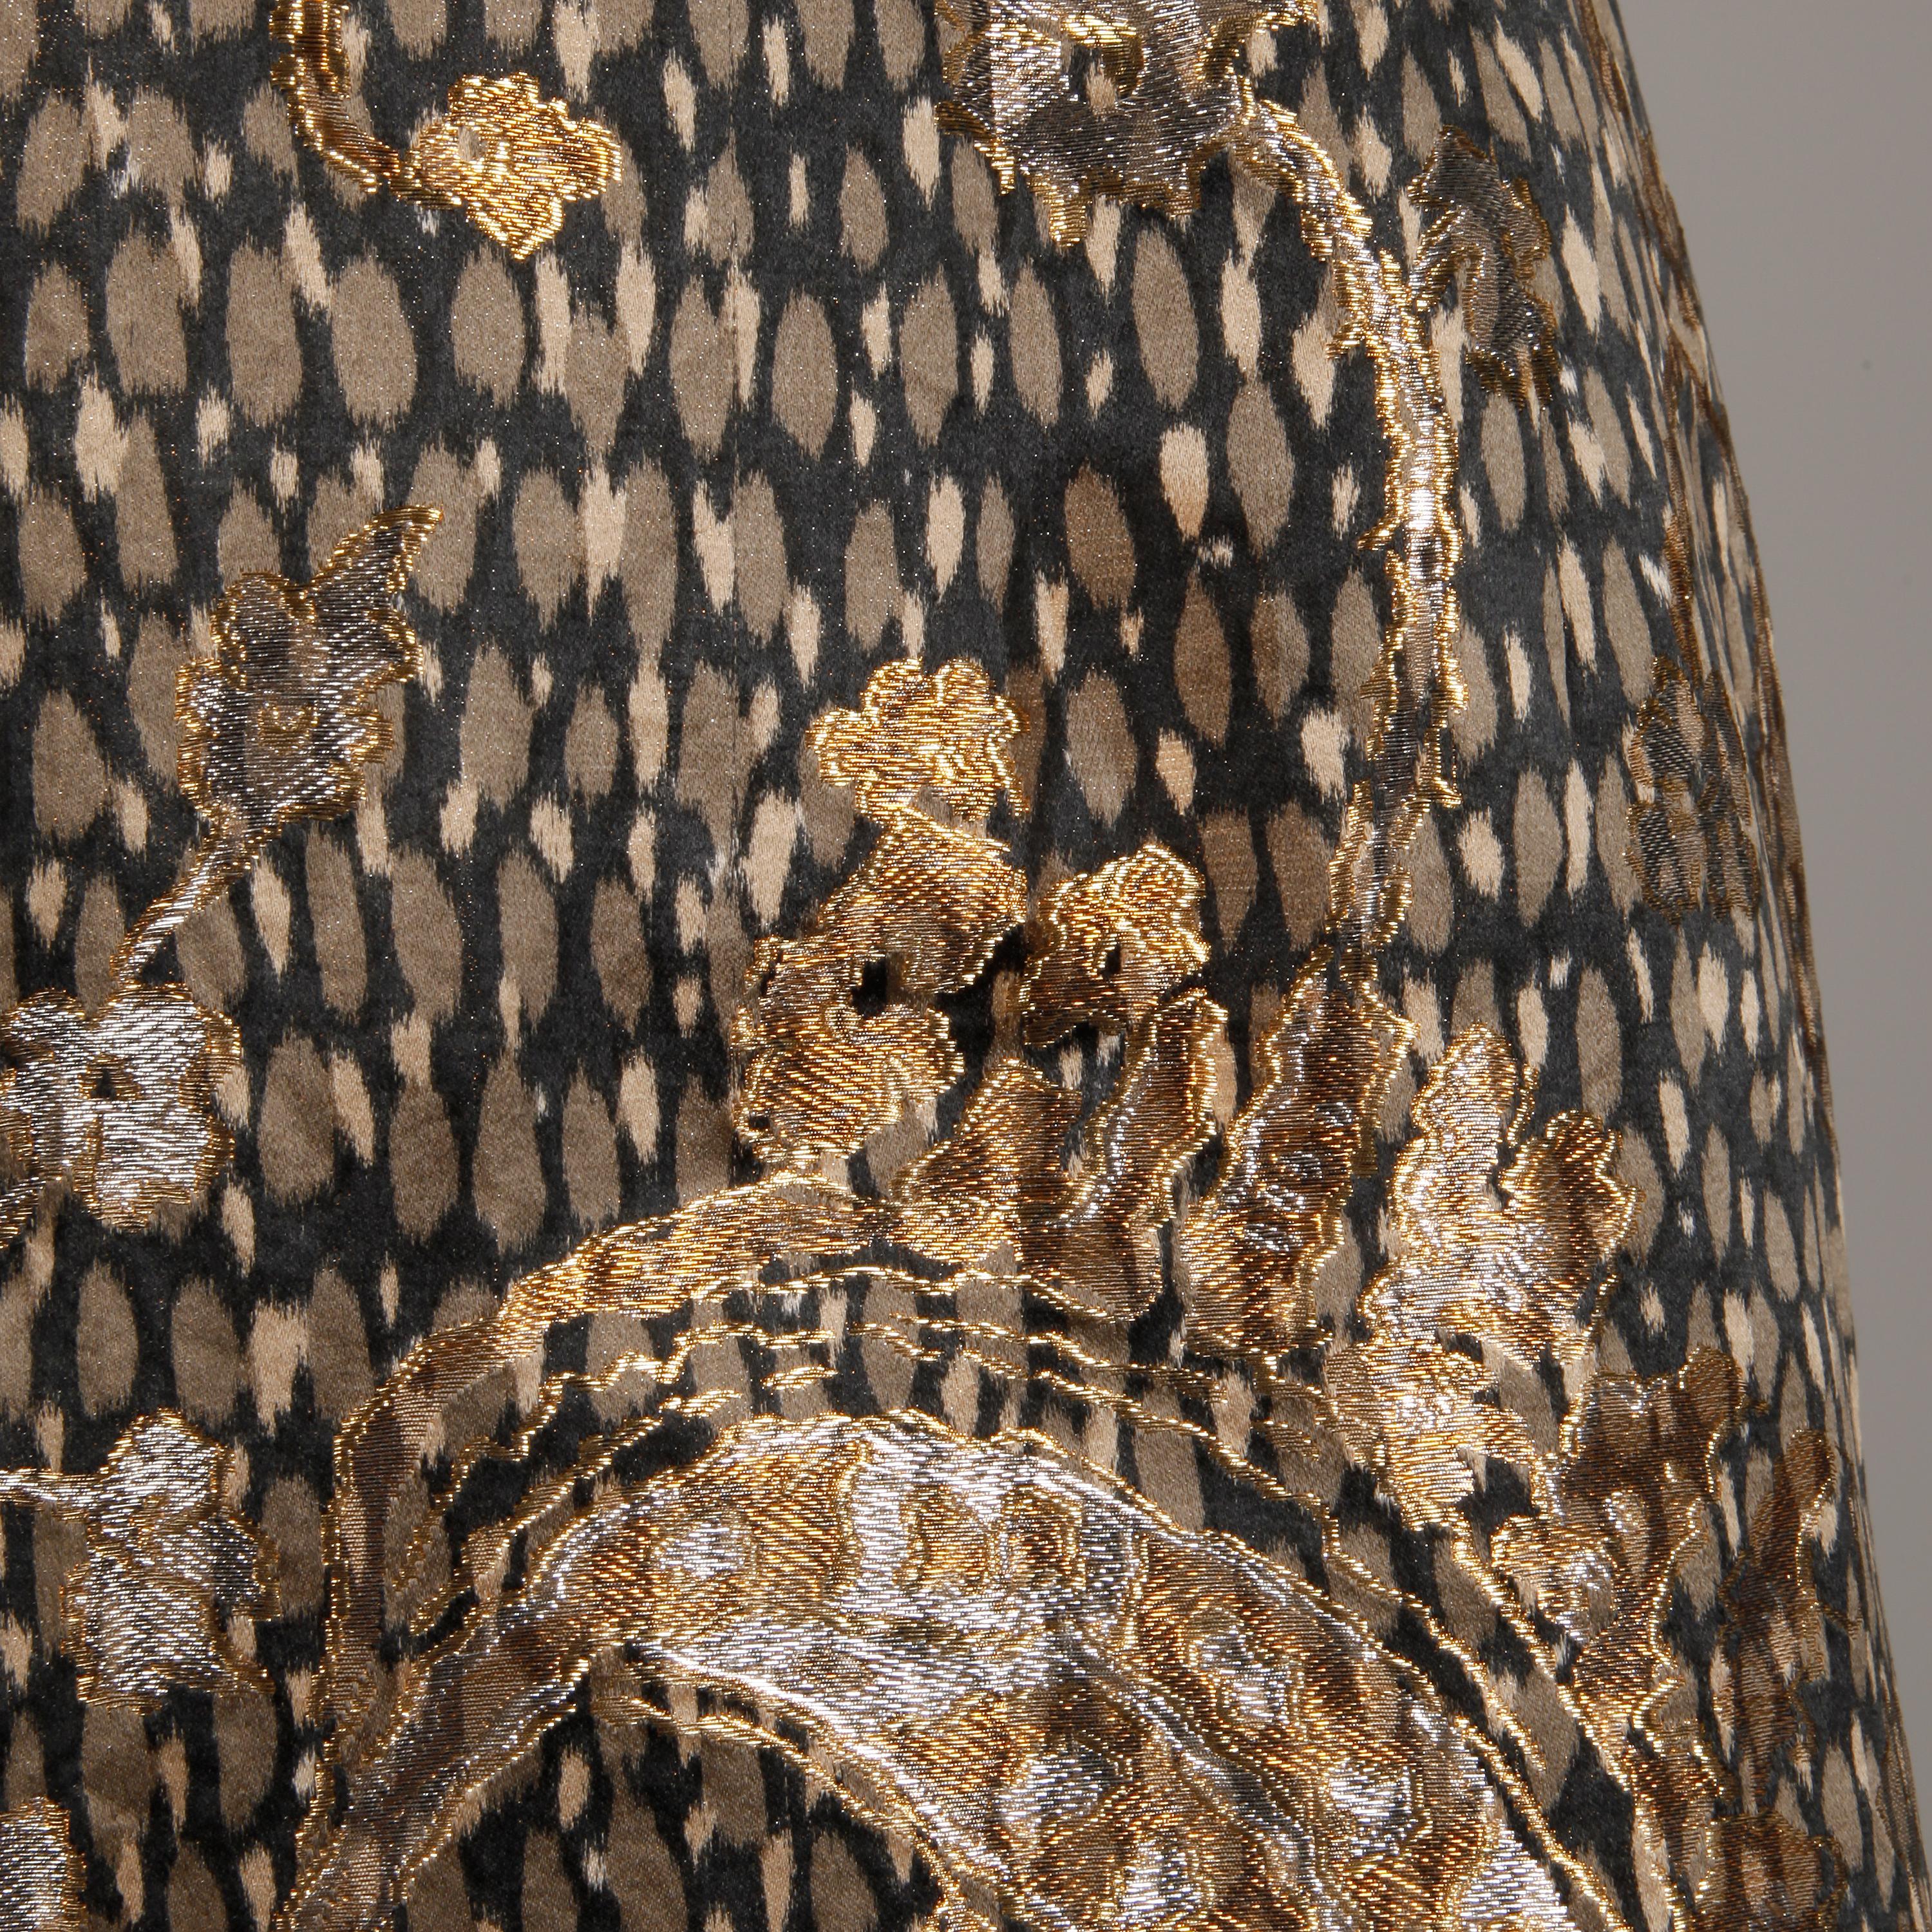 Absolutely stunning 1960s vintage silk satin cocktail dress by Helga. Metallic brocade paisley design over gray silk animal print. Nipped waist with bow detail. Stunning construction with a weighted bust and hand stitching throughout. Partially